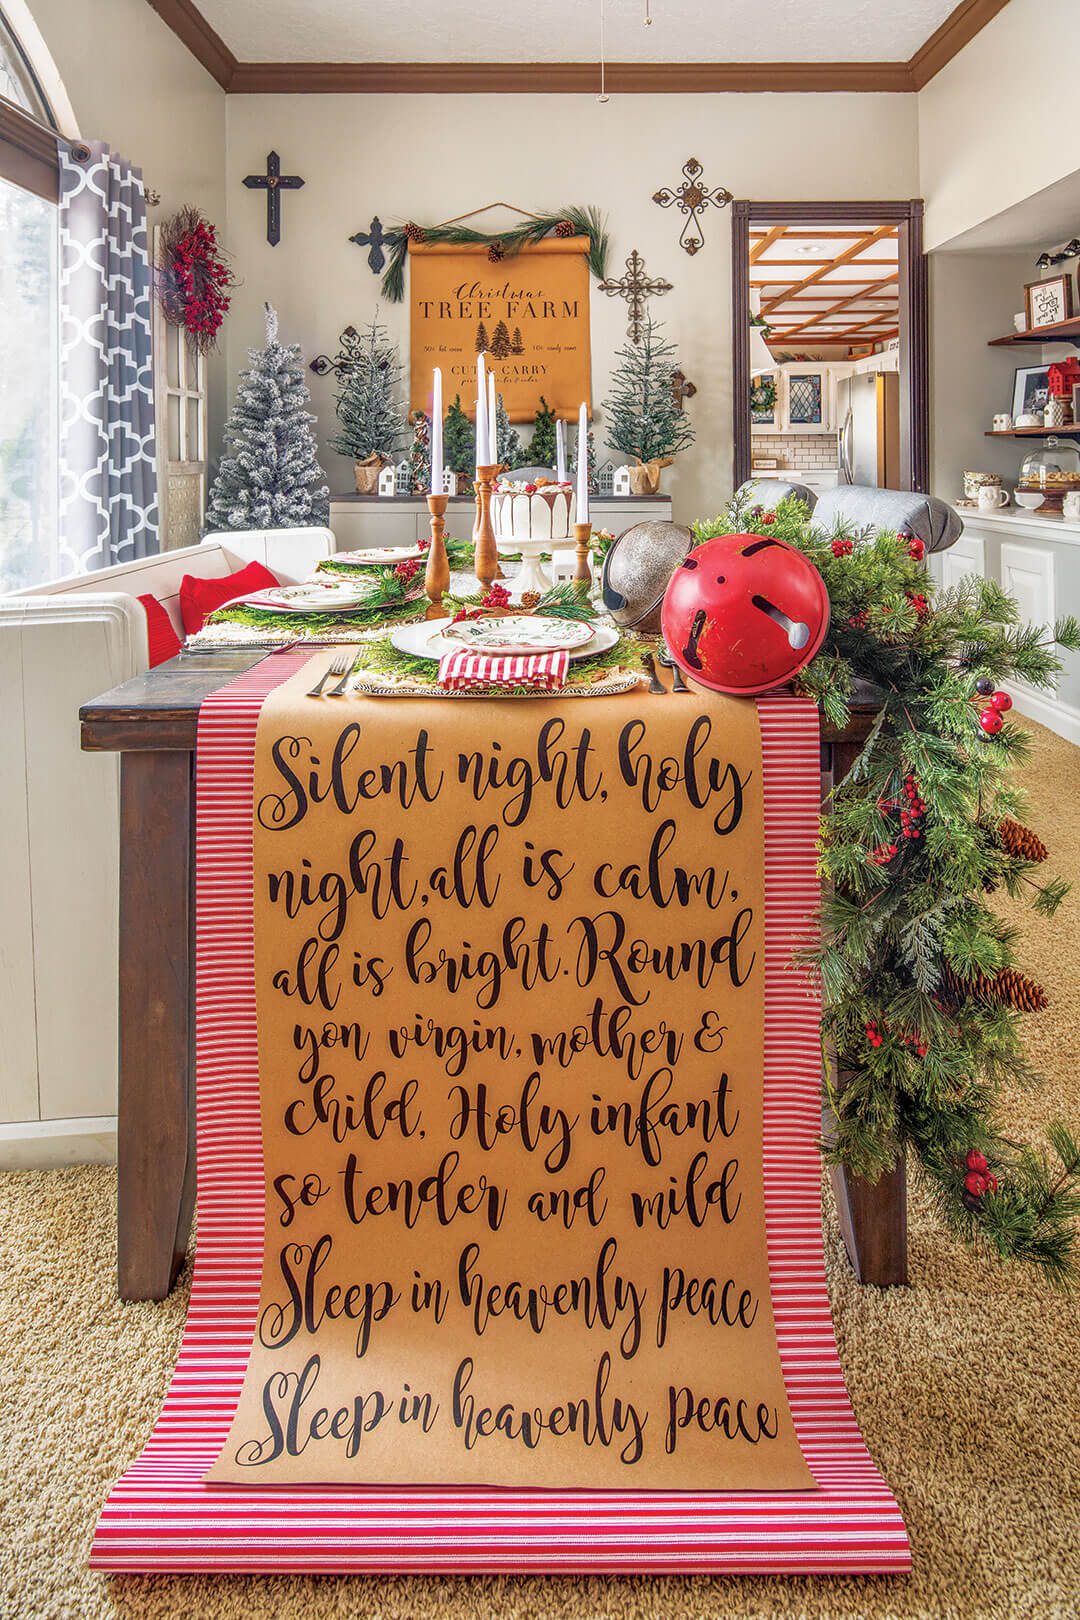 Dining table with Christmas garland, sign art and set table